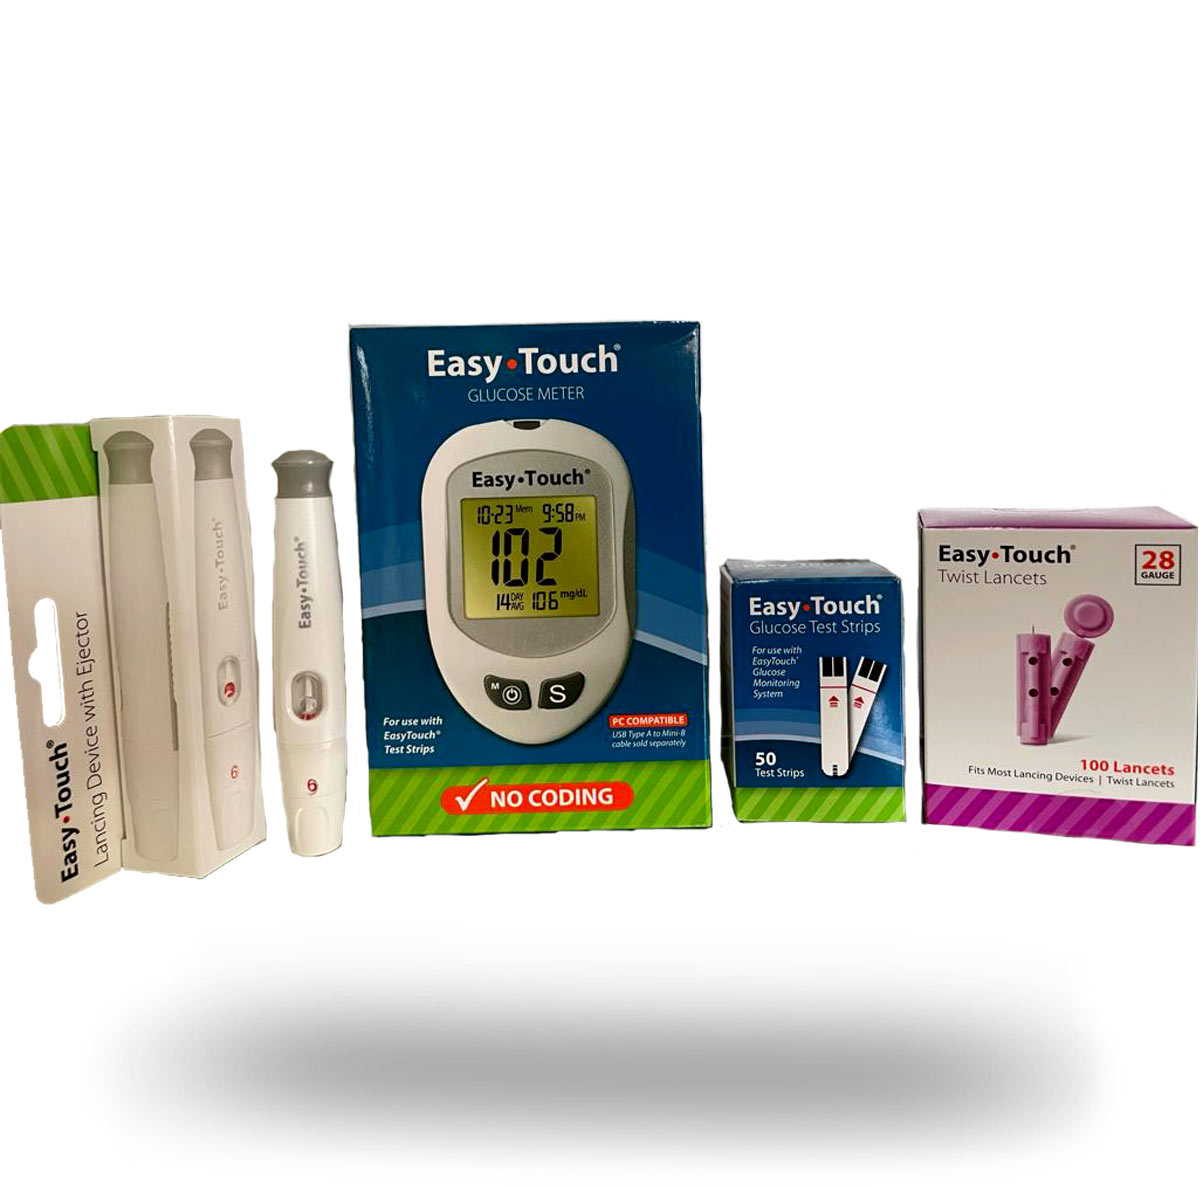 Easy Touch Meter Plus Lancing Device PLUS Test Strips + Twists Lancets